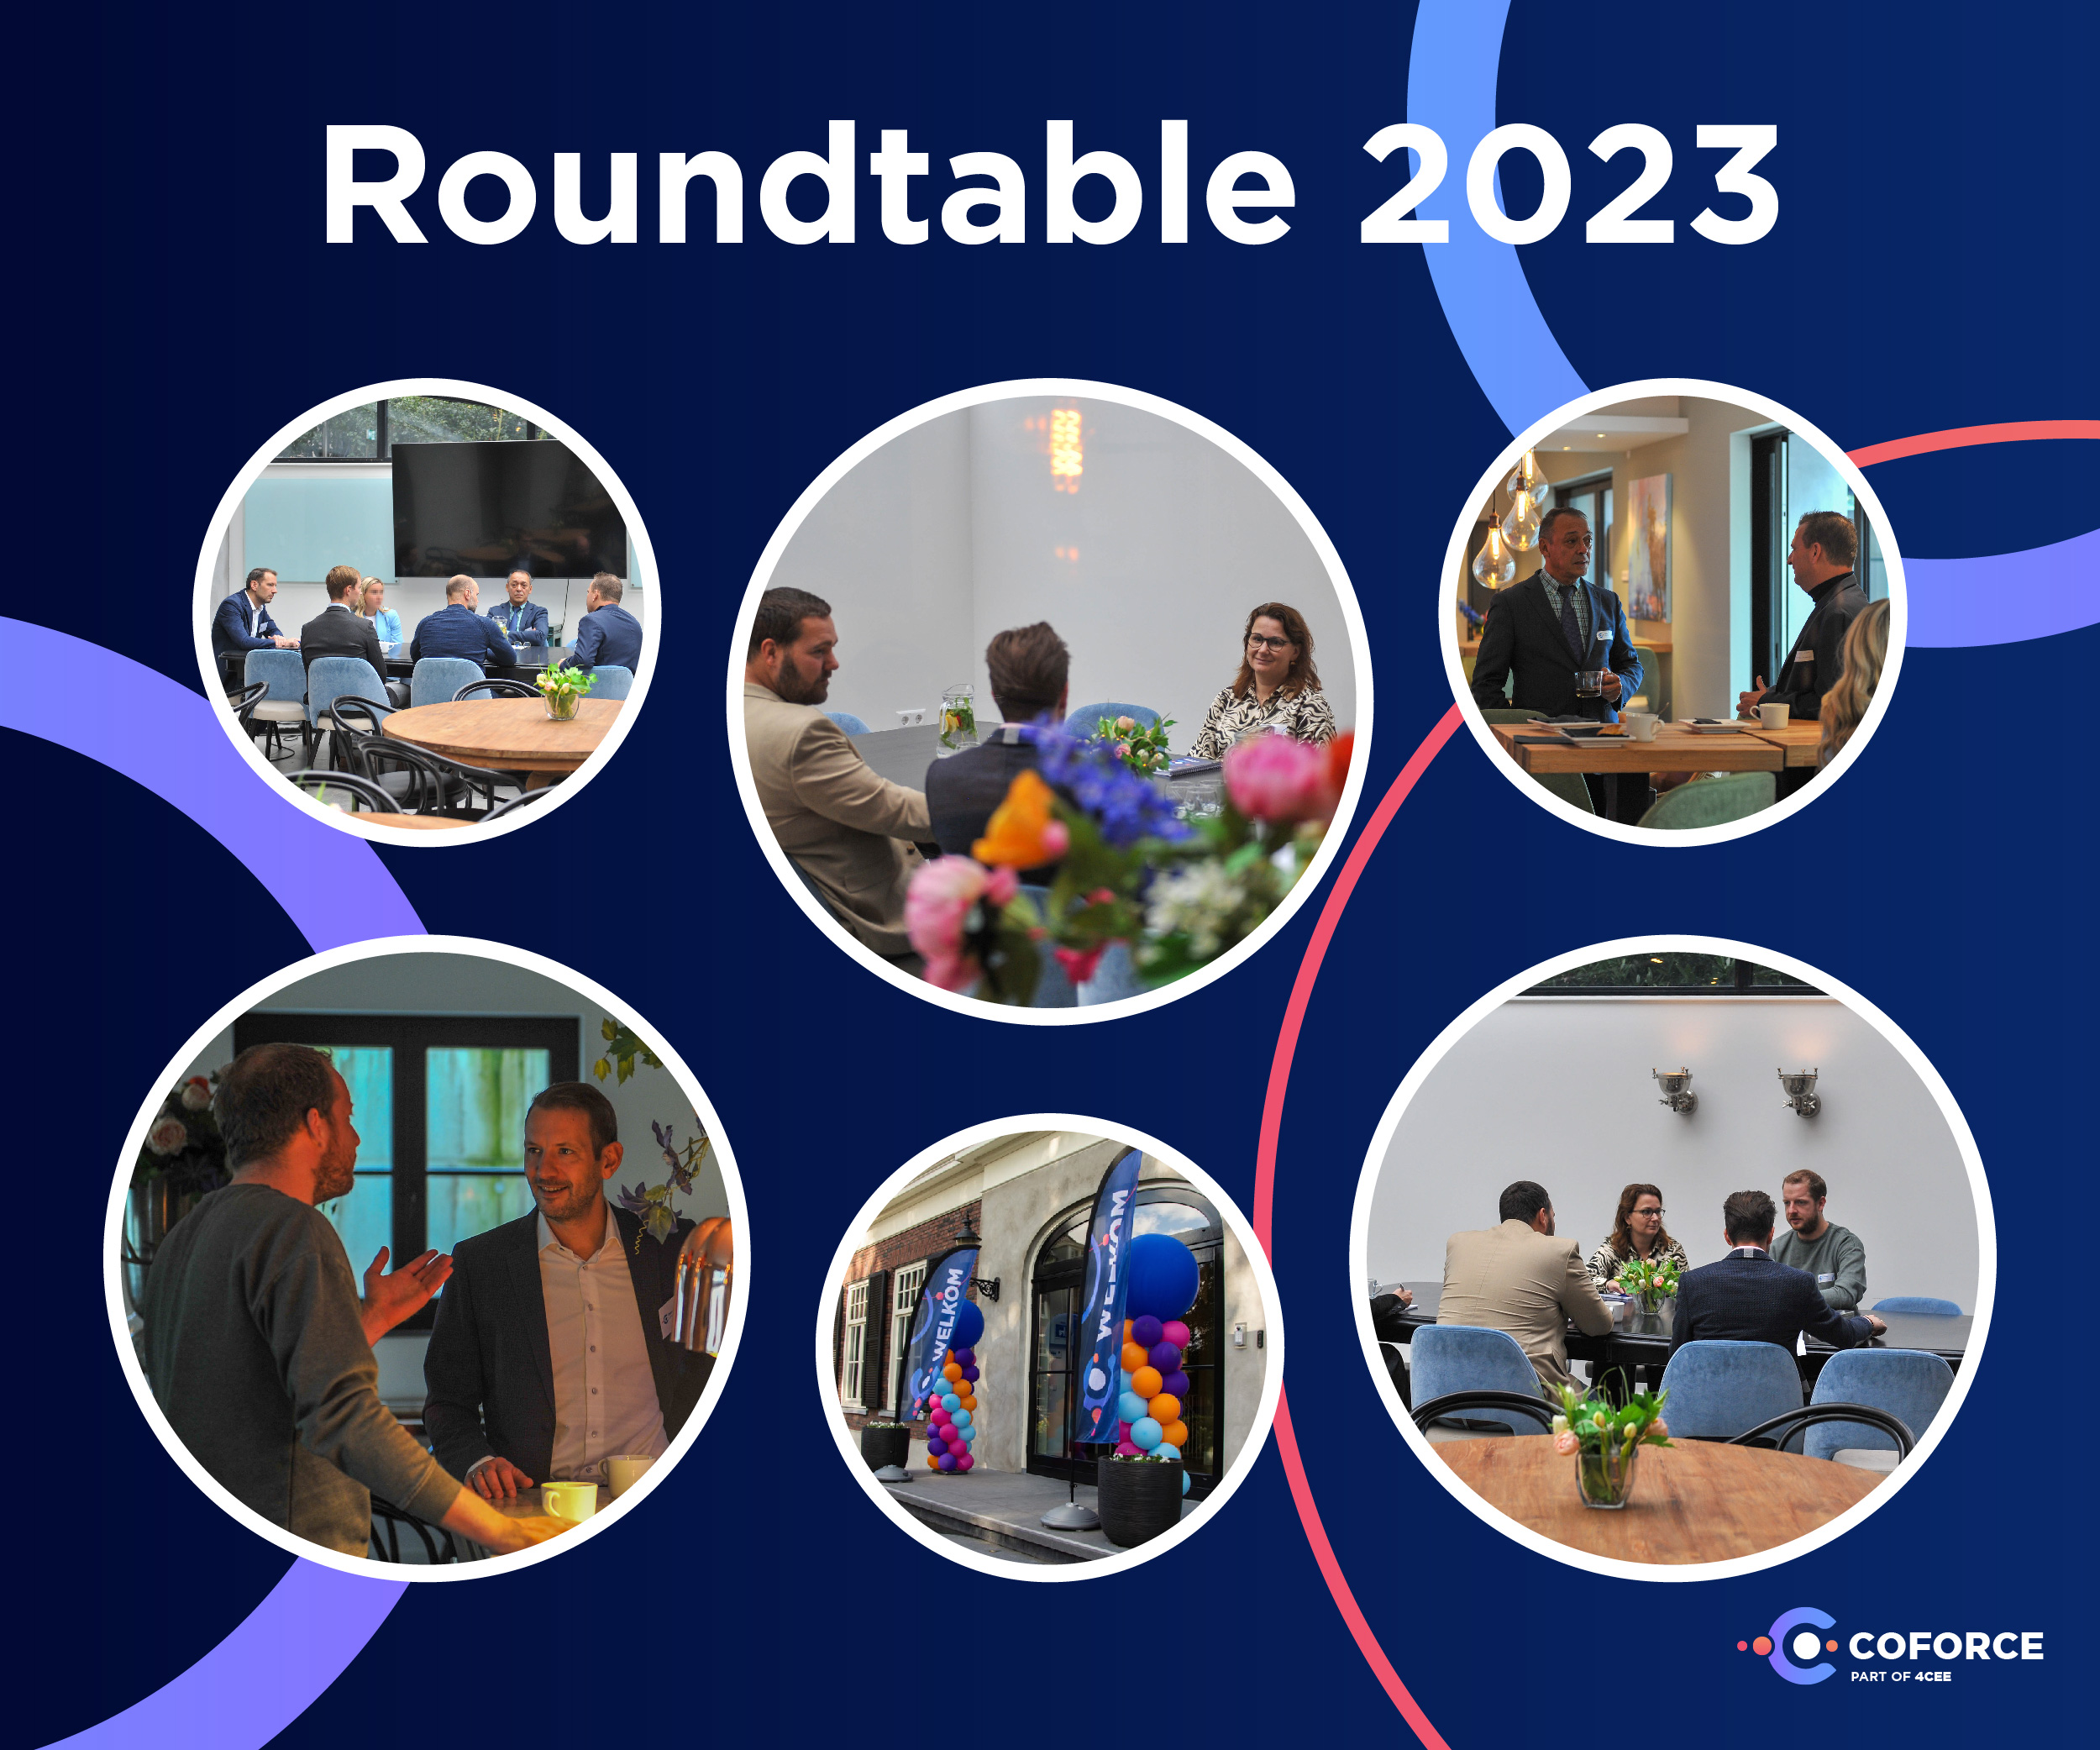 Fotocollage roundtables coforce